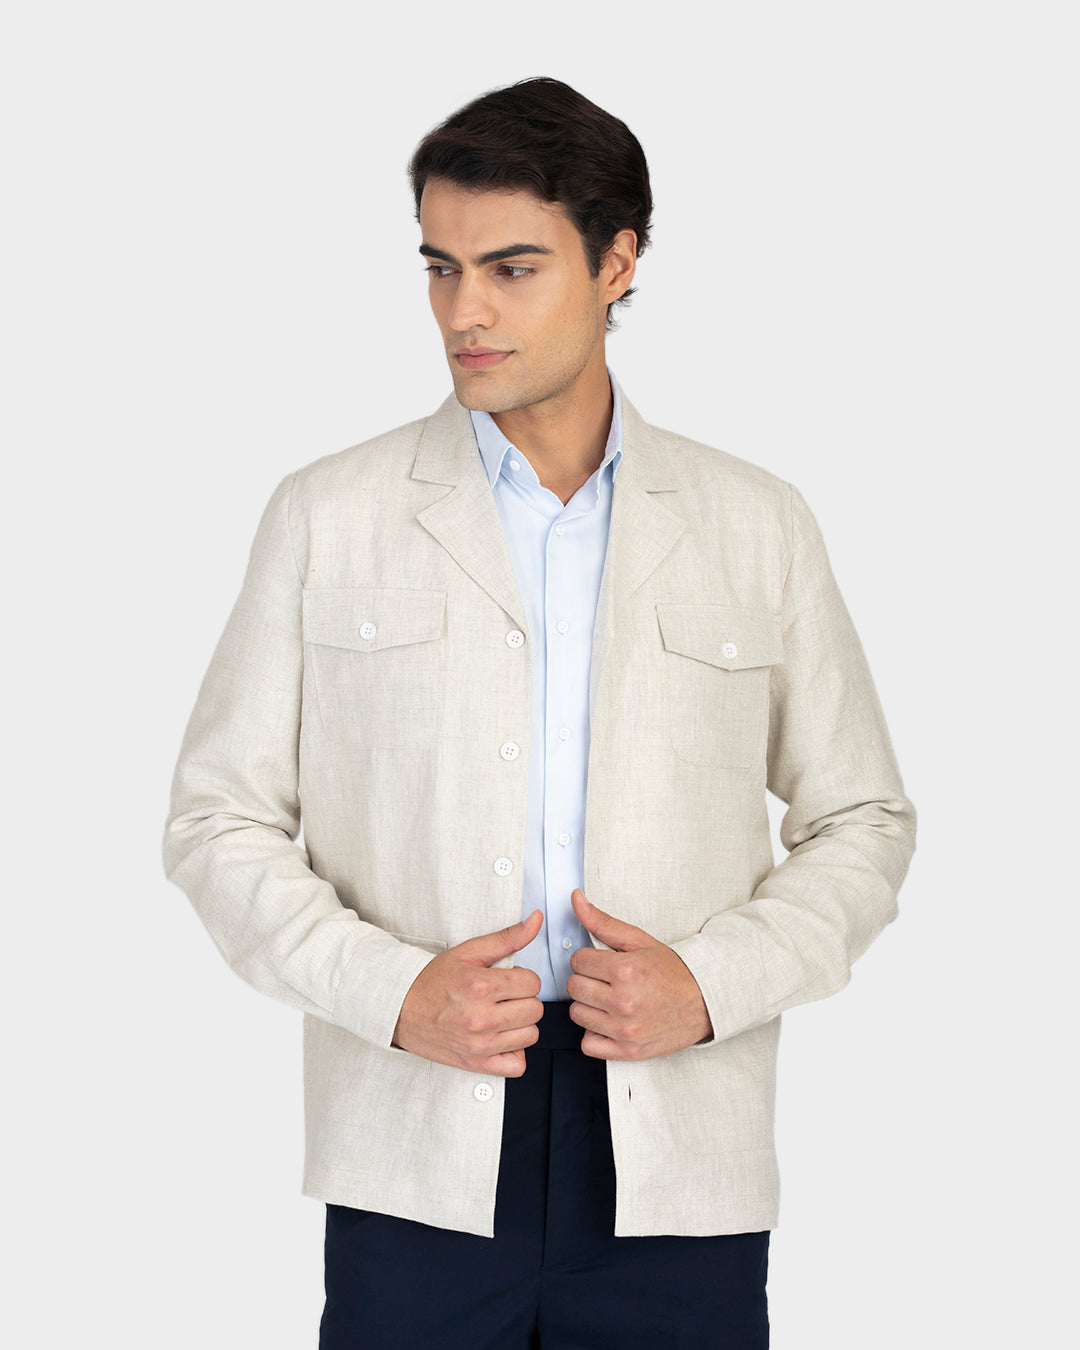 Model wearing the muslin shirt jacket for men by Luxire hands together